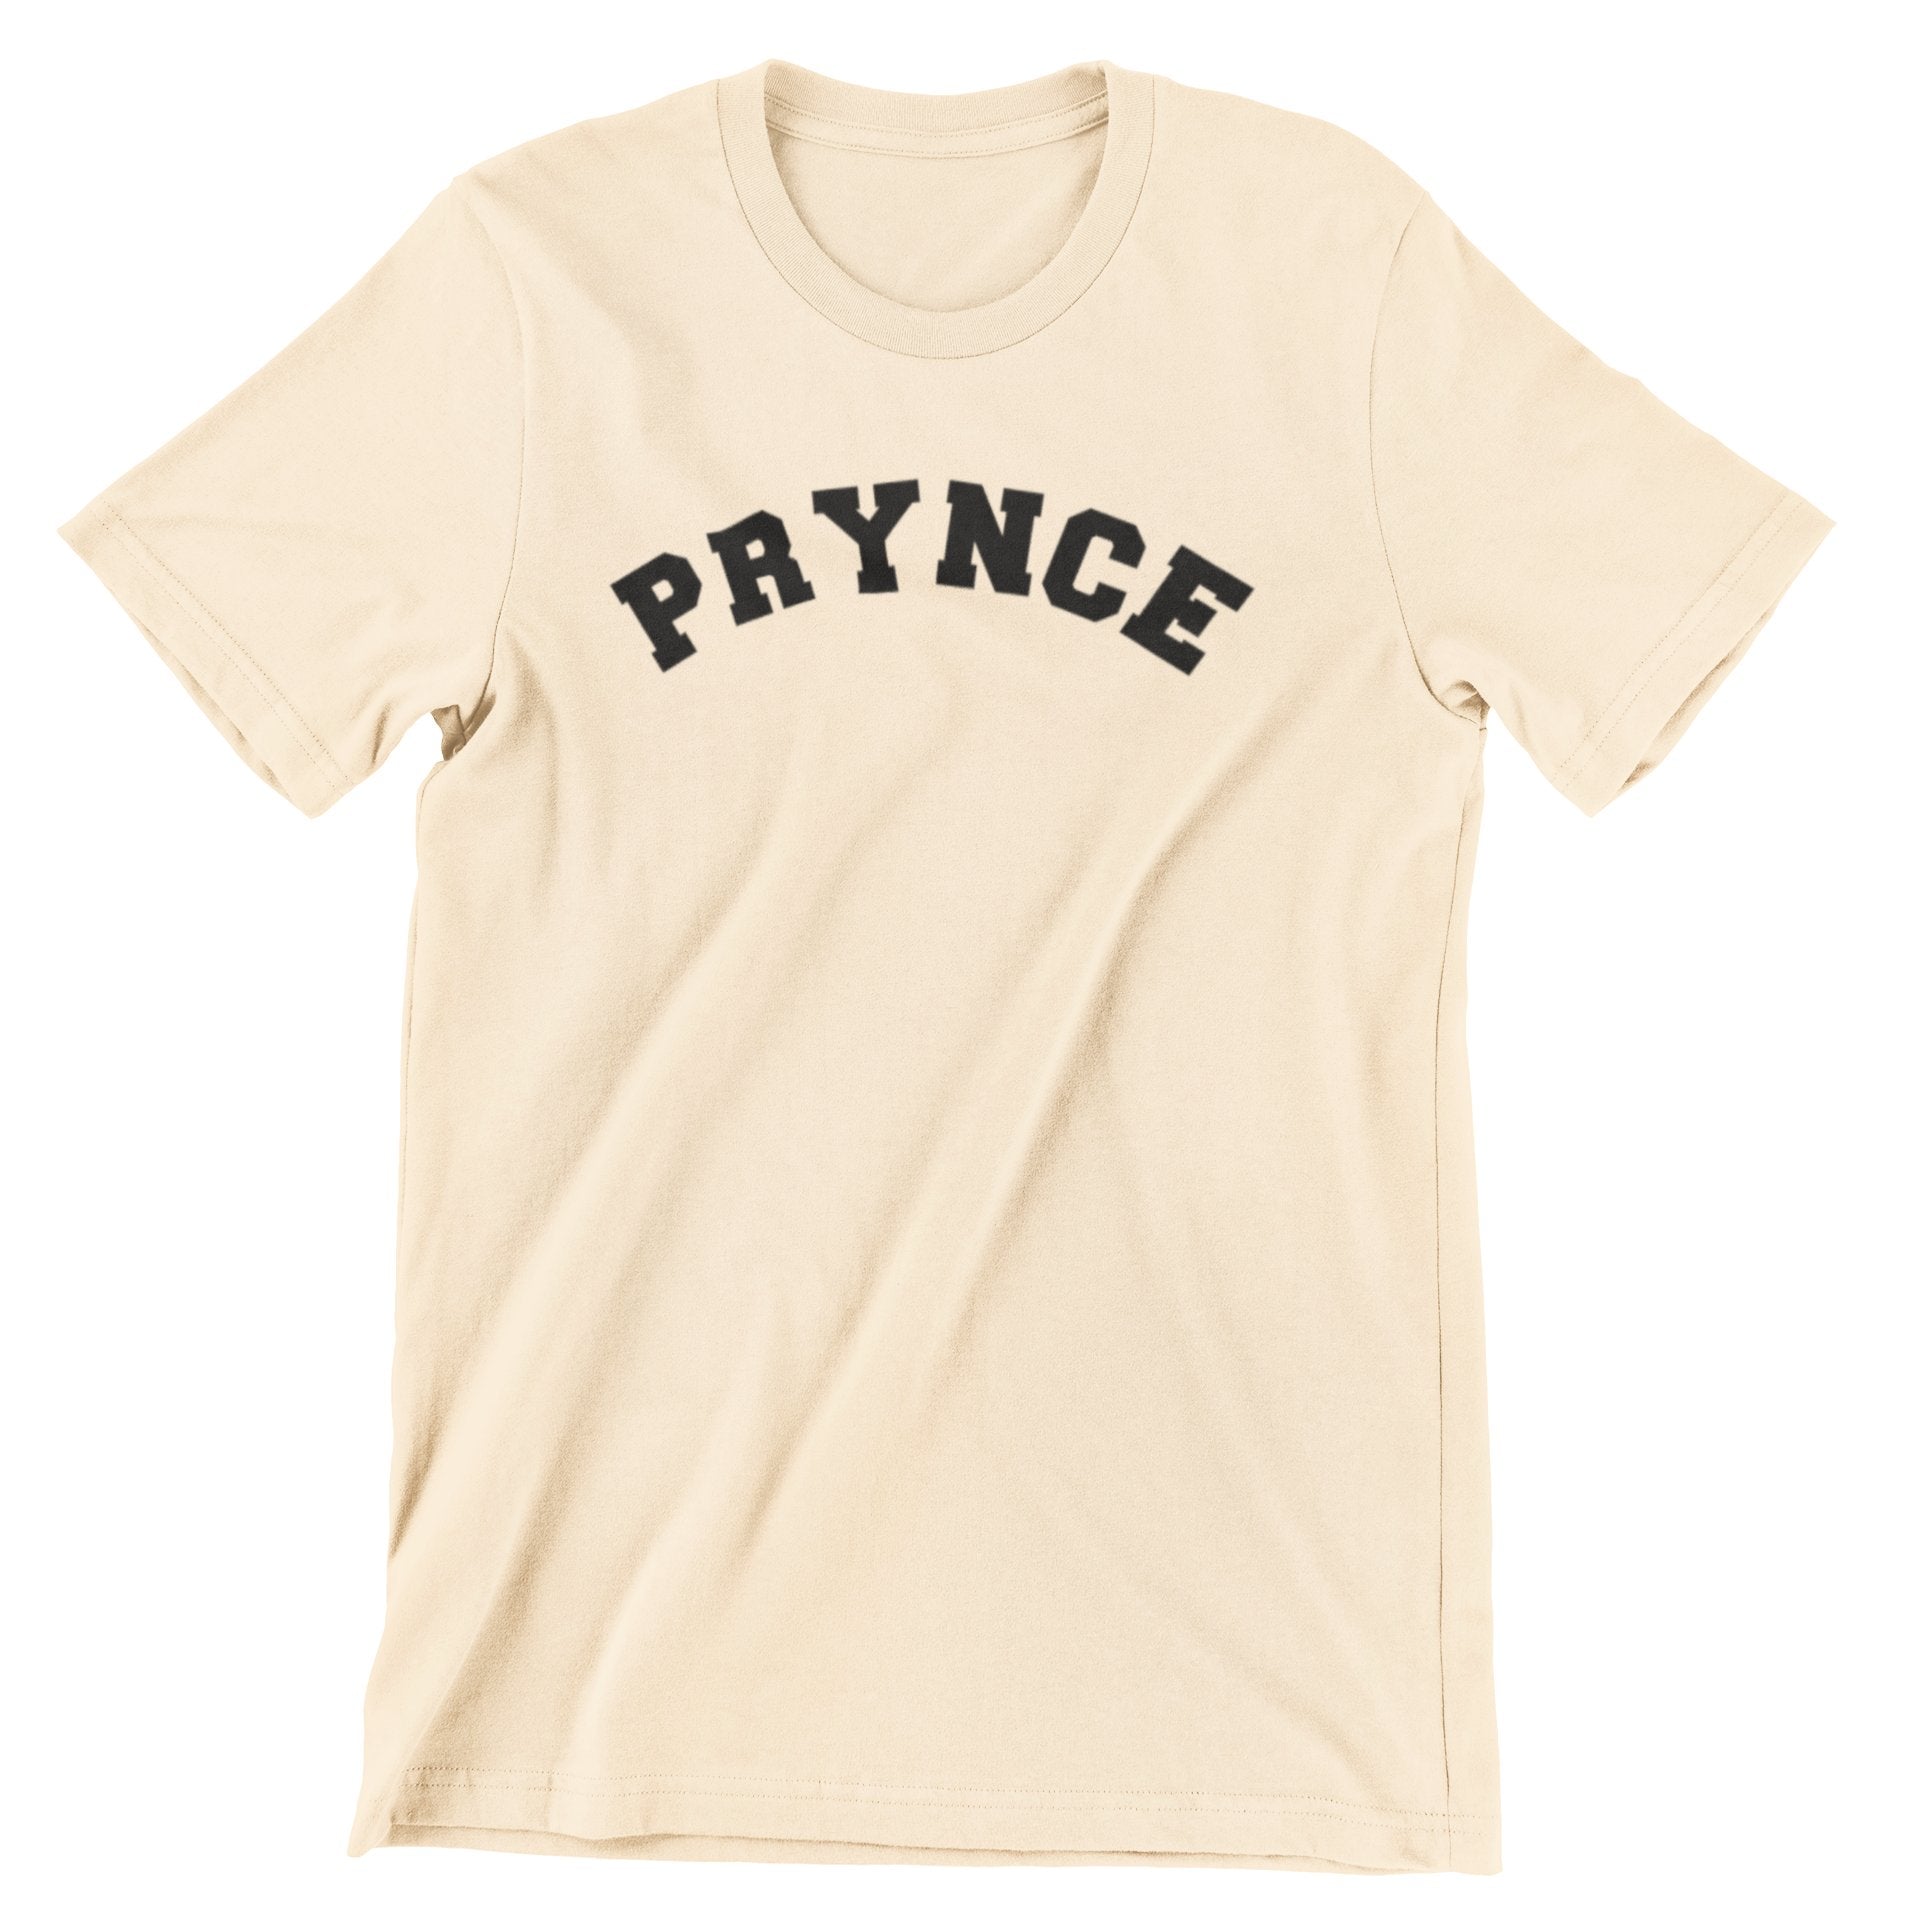 High end t-shirt from clothing store Prince Clothing 